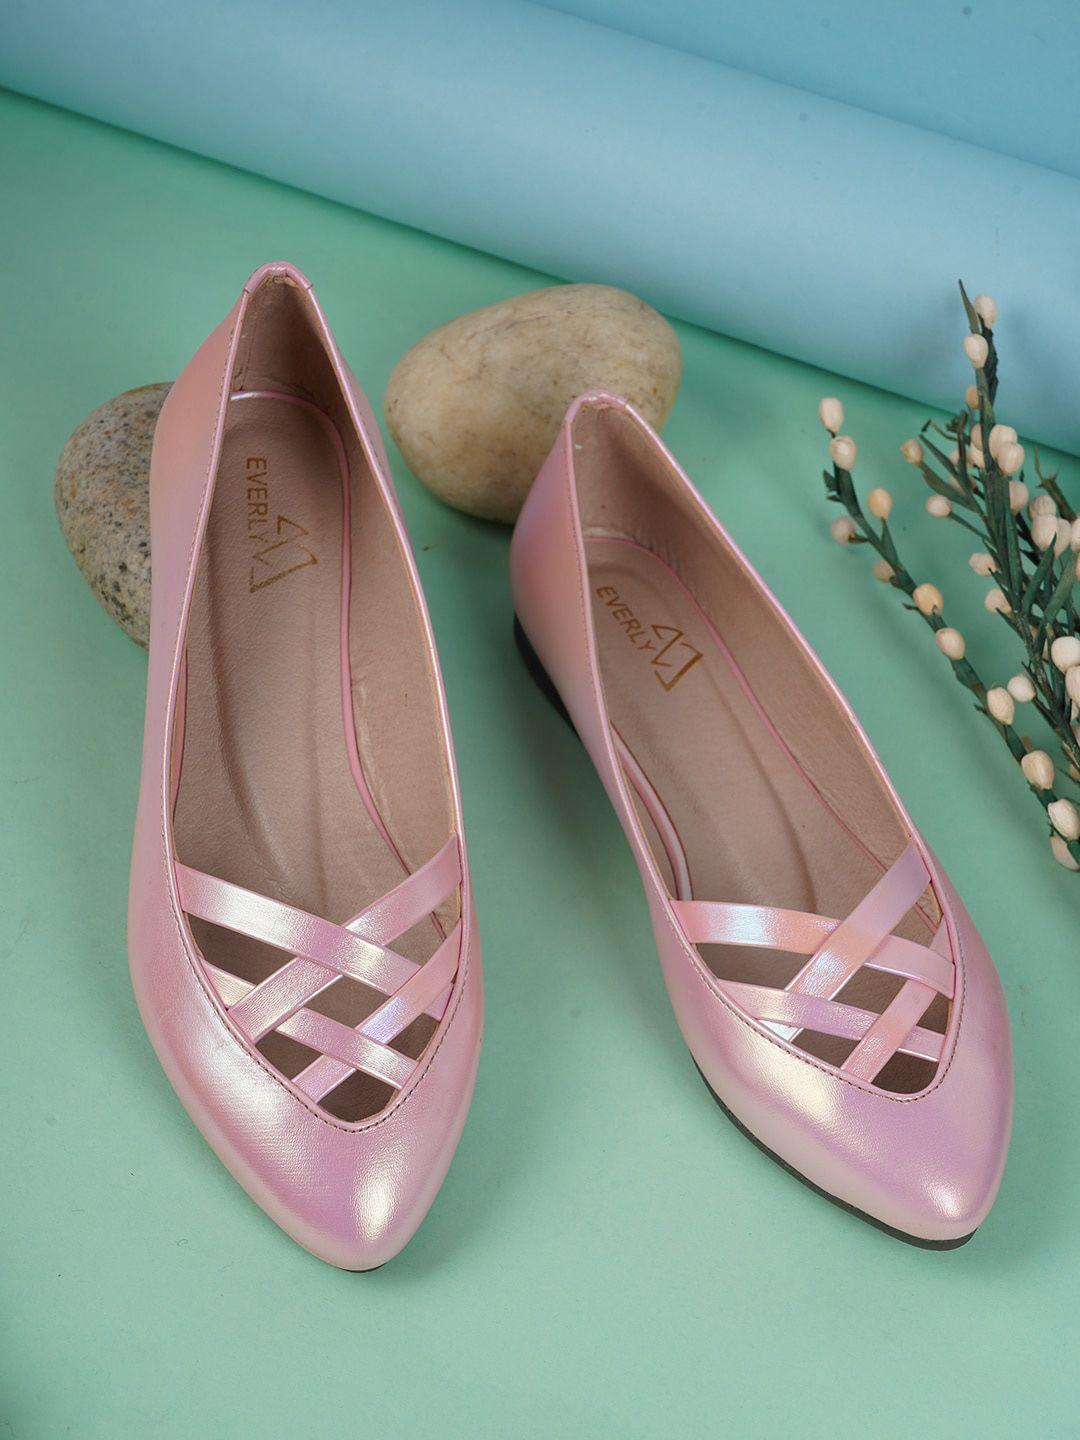 everly women rose gold ballerinas with bows flats